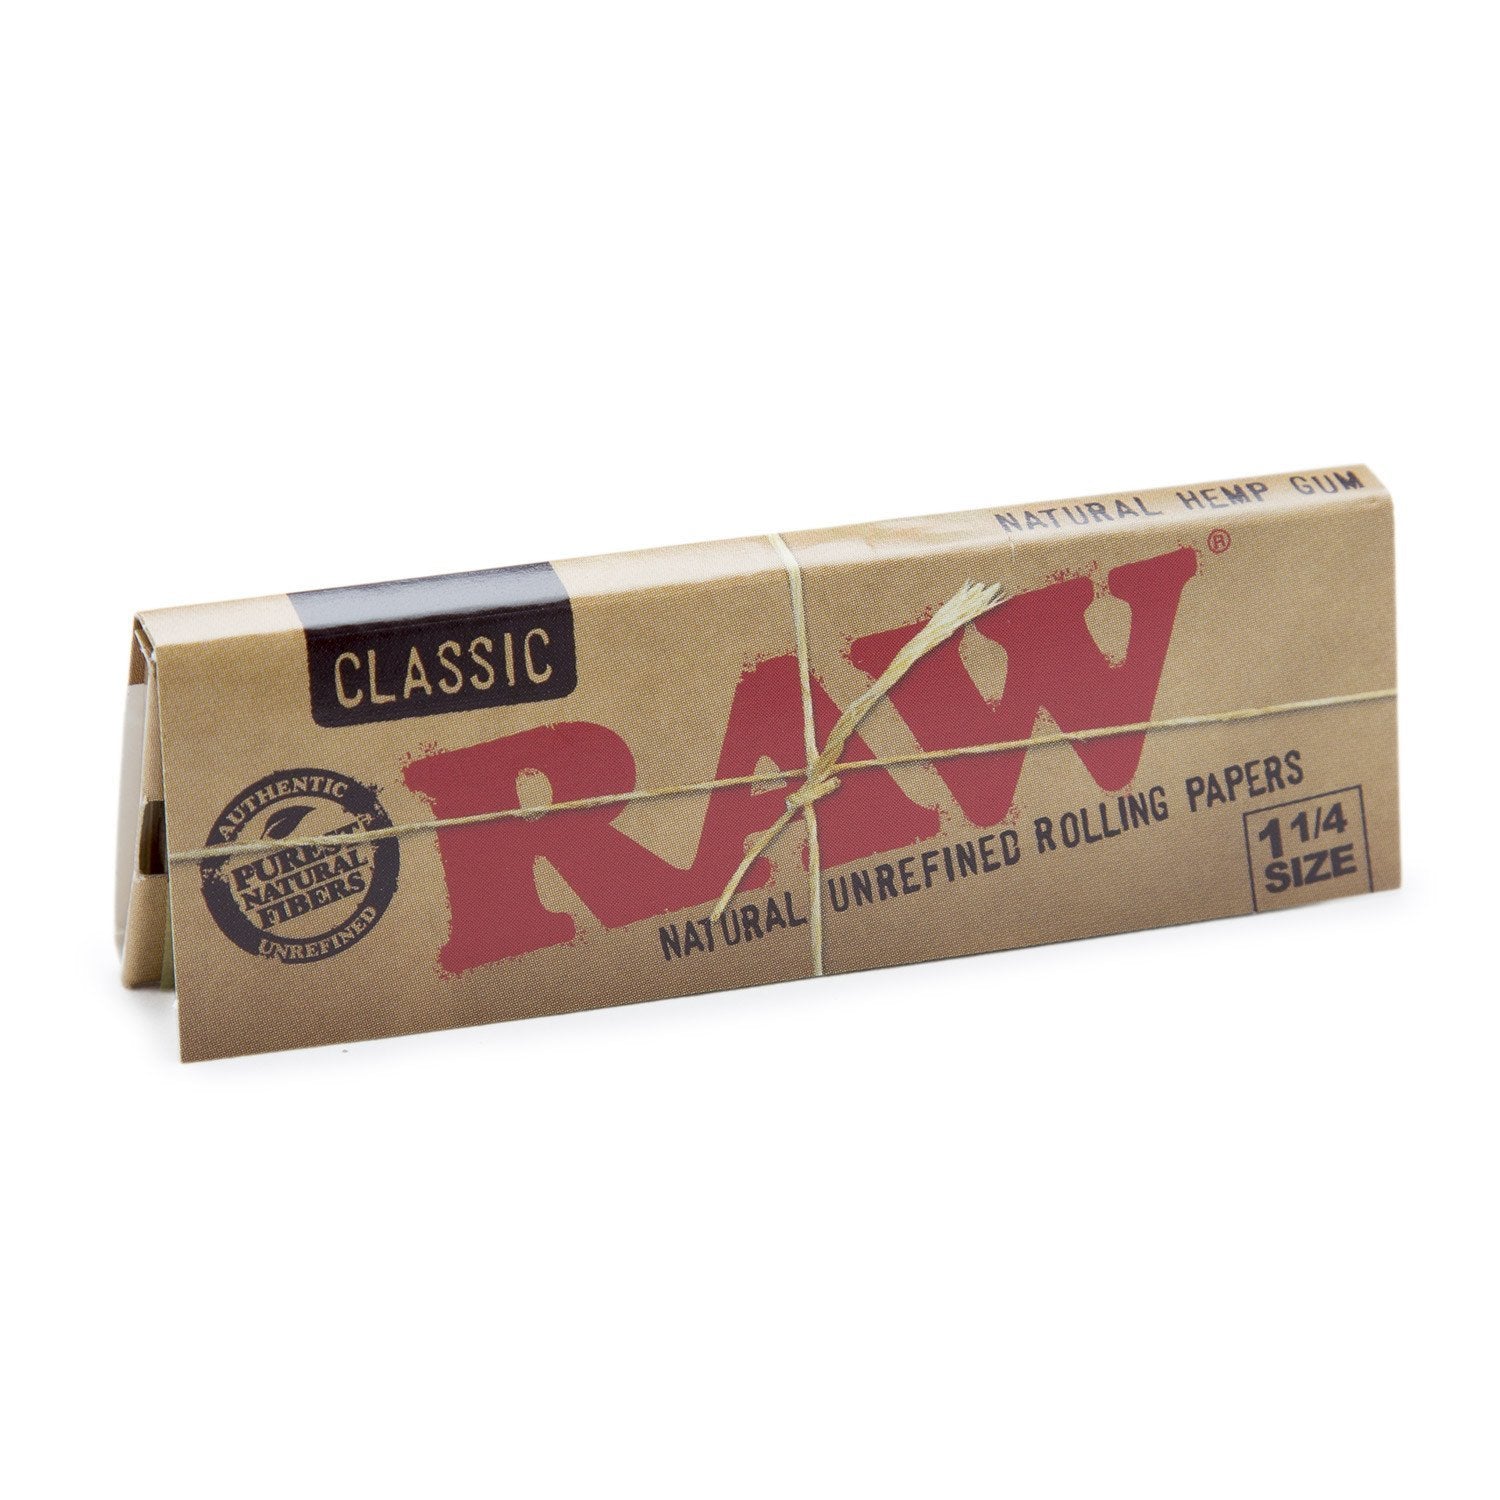 RAW Classic 1 1/4 500s Rolling Paper - 20ct Display